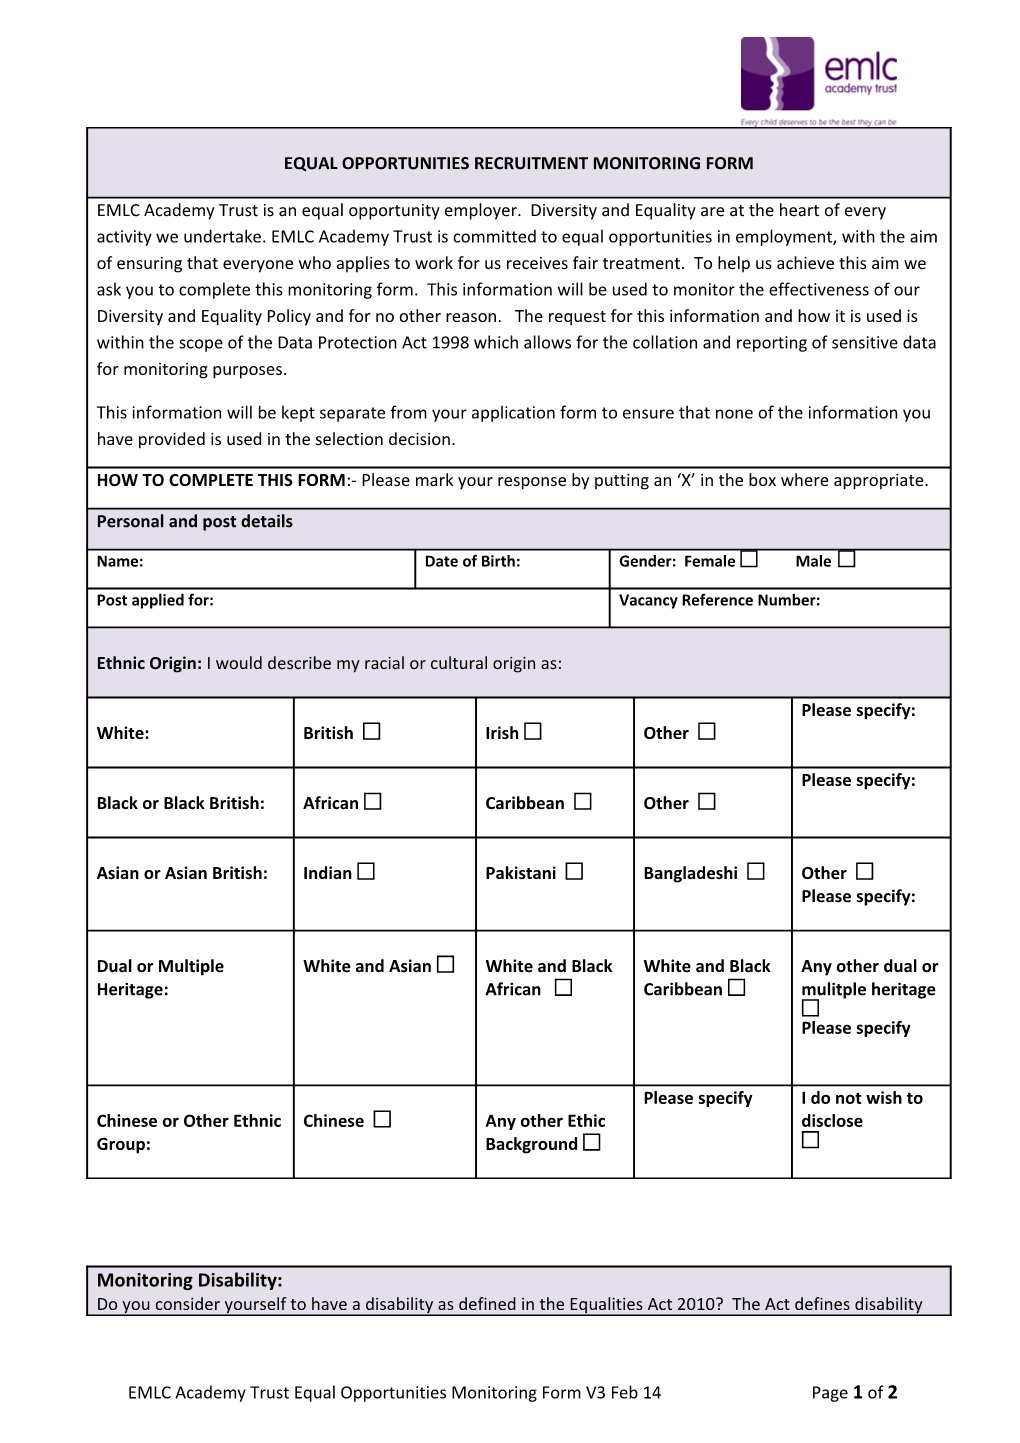 EMLC Academy Trust Equal Opportunities Monitoring Form V3 Feb 14 Page 1 of 2